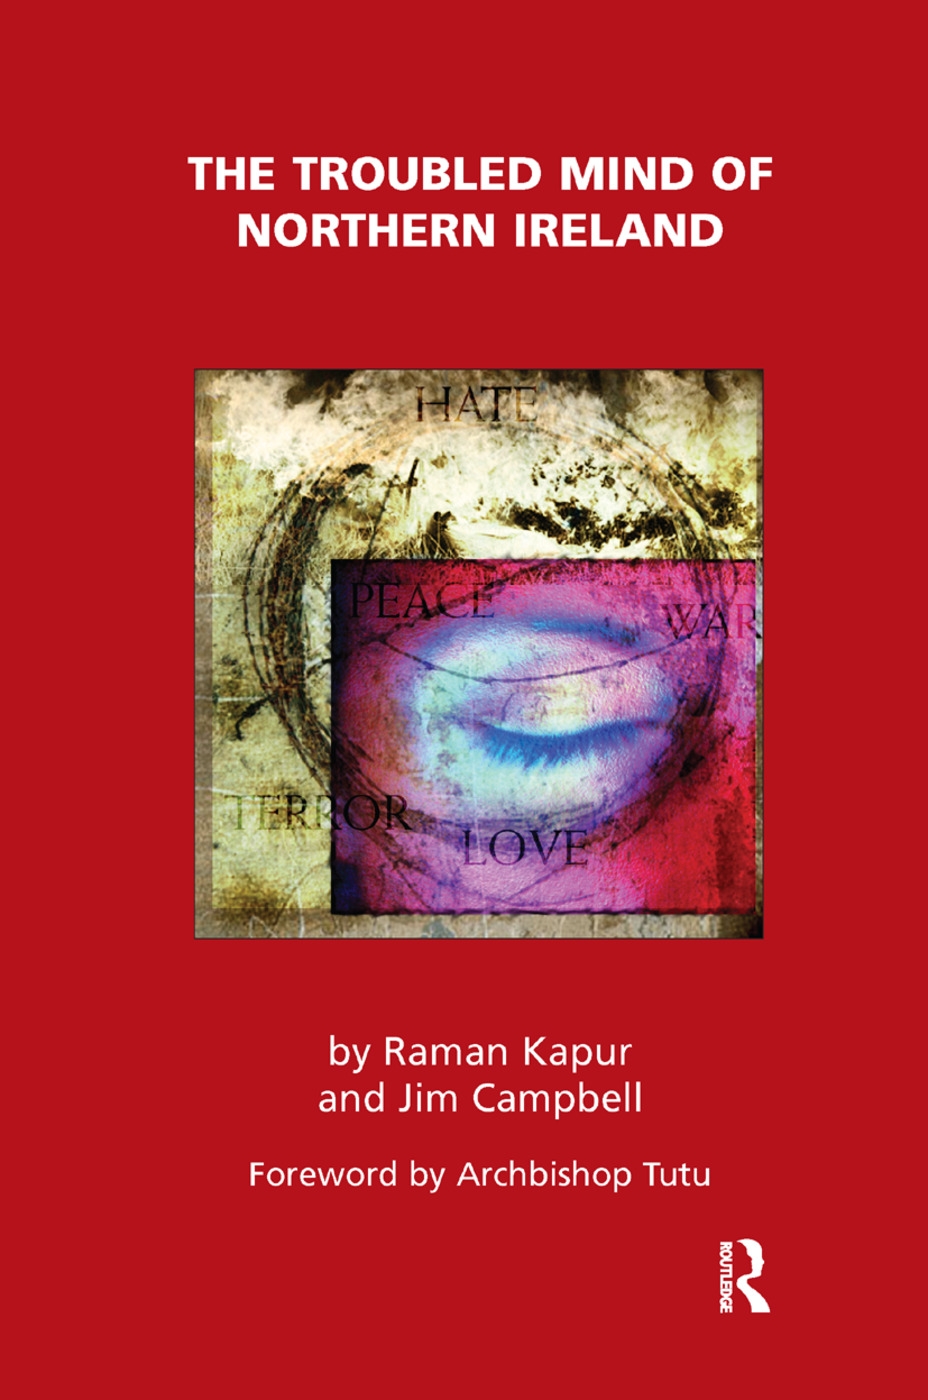 The Troubled Mind of Northern Ireland: An Analysis of the Emotional Effects of the Troubles